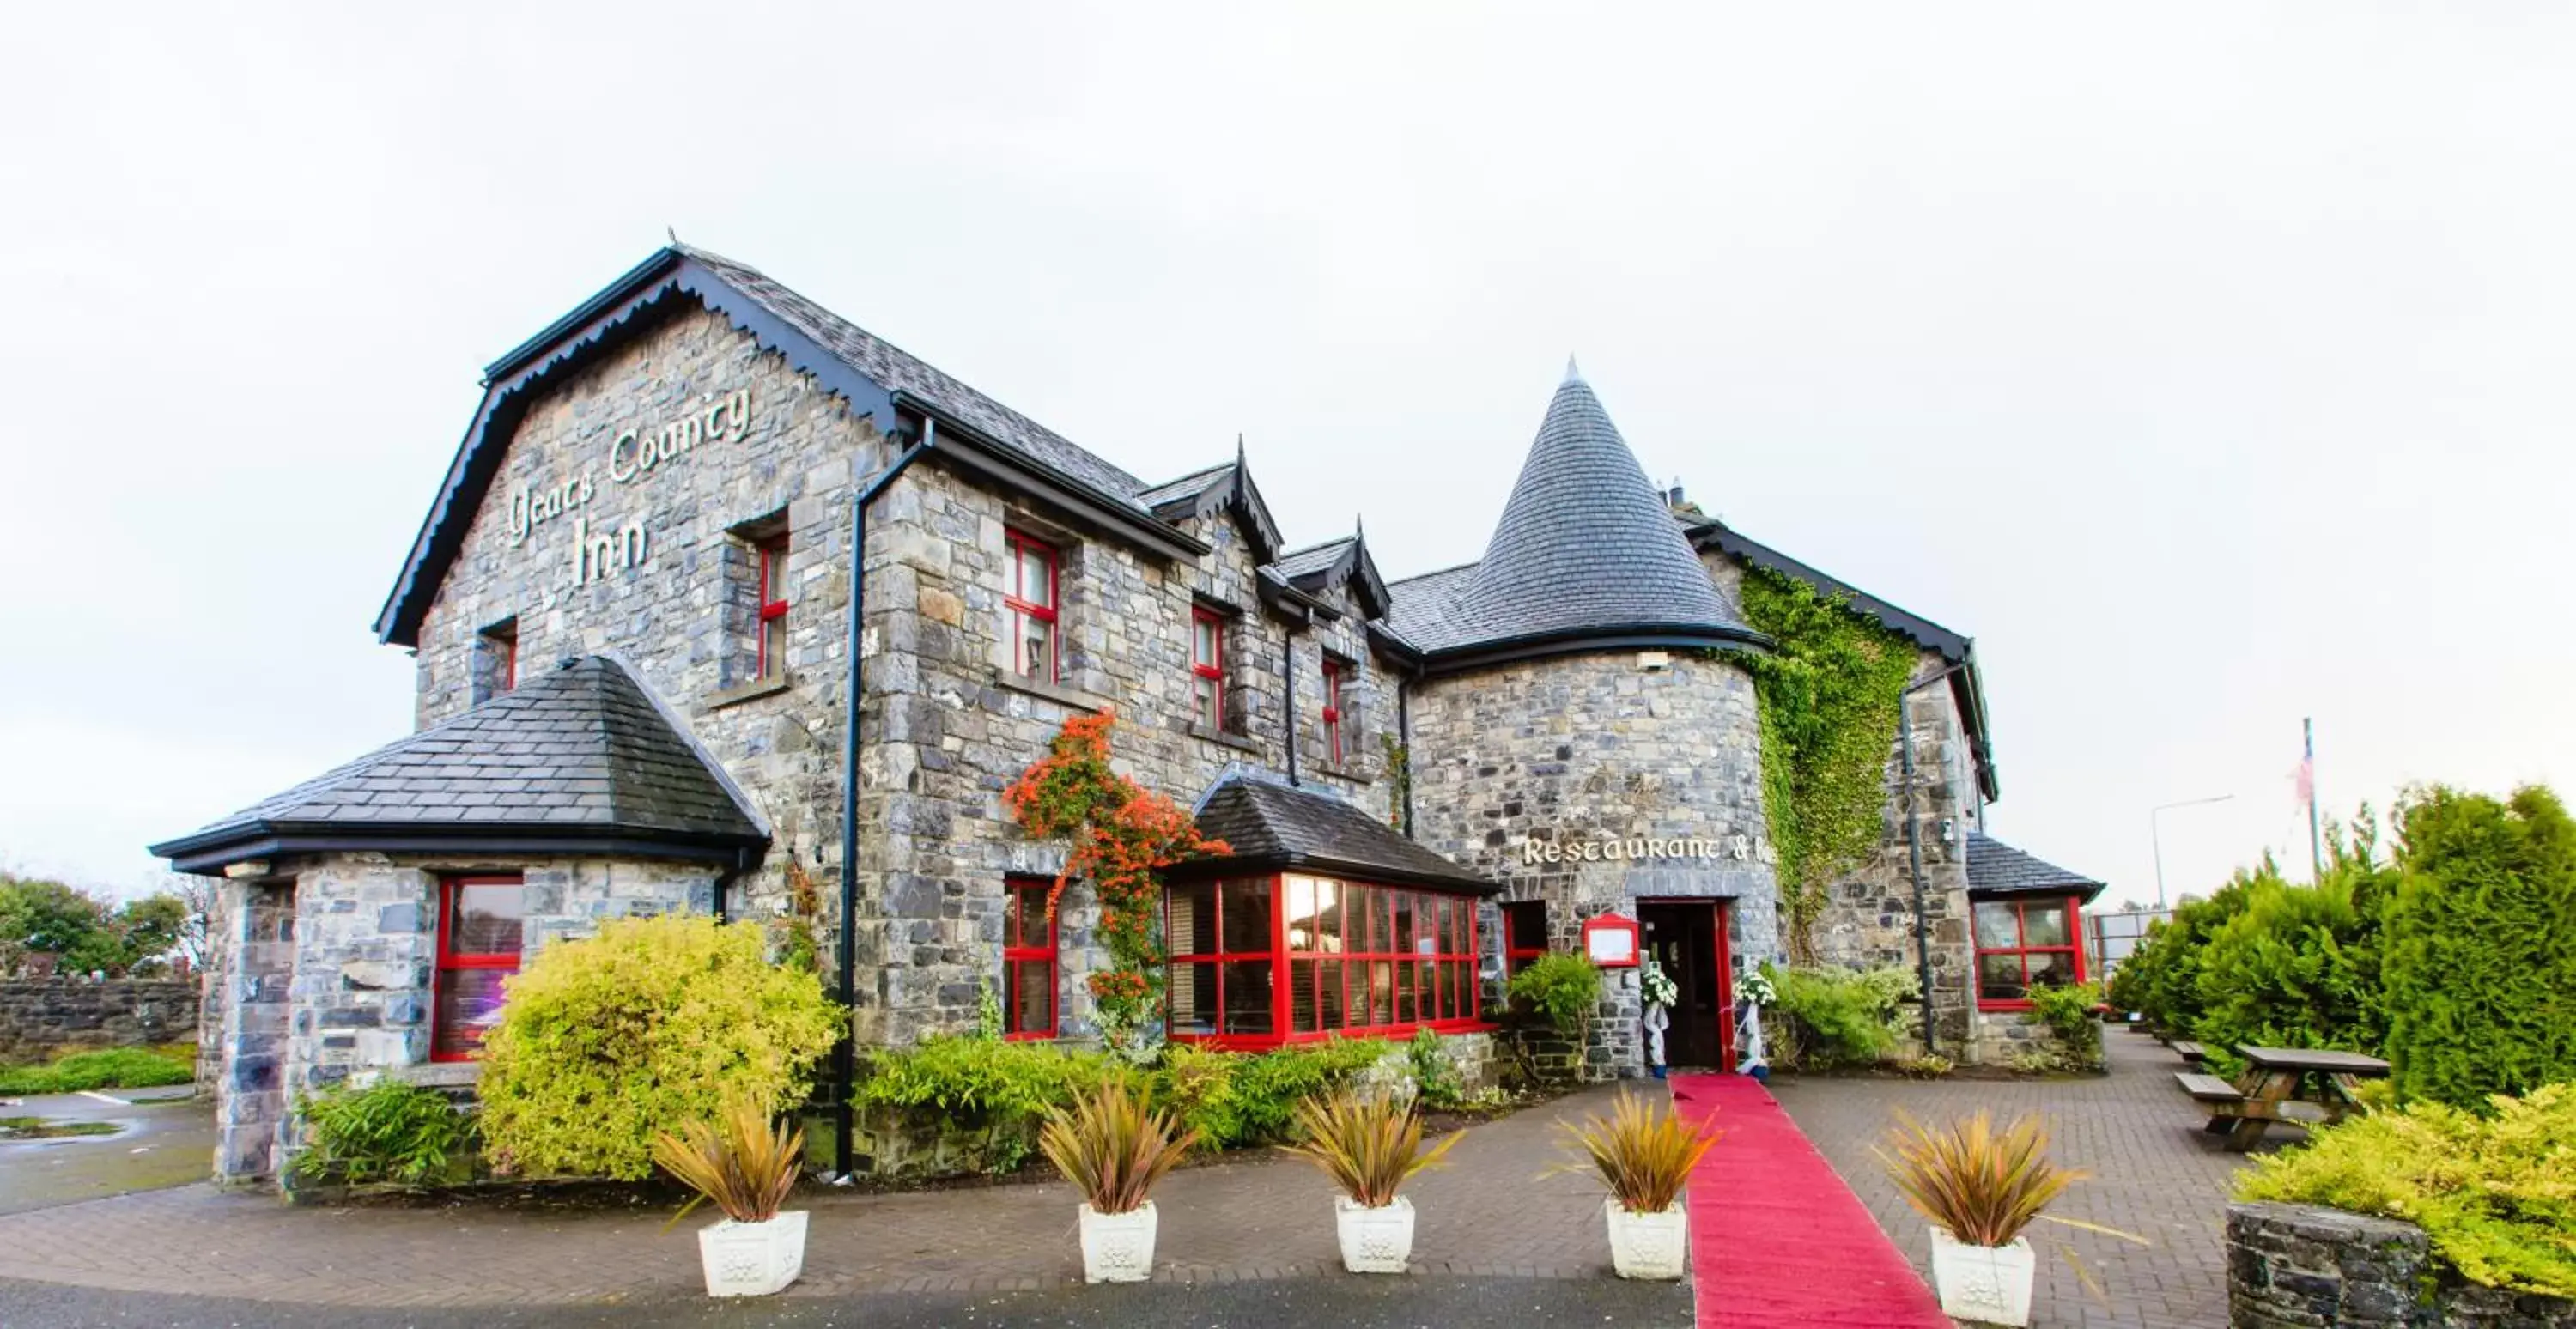 Nearby landmark, Property Building in The Yeats County Inn Hotel